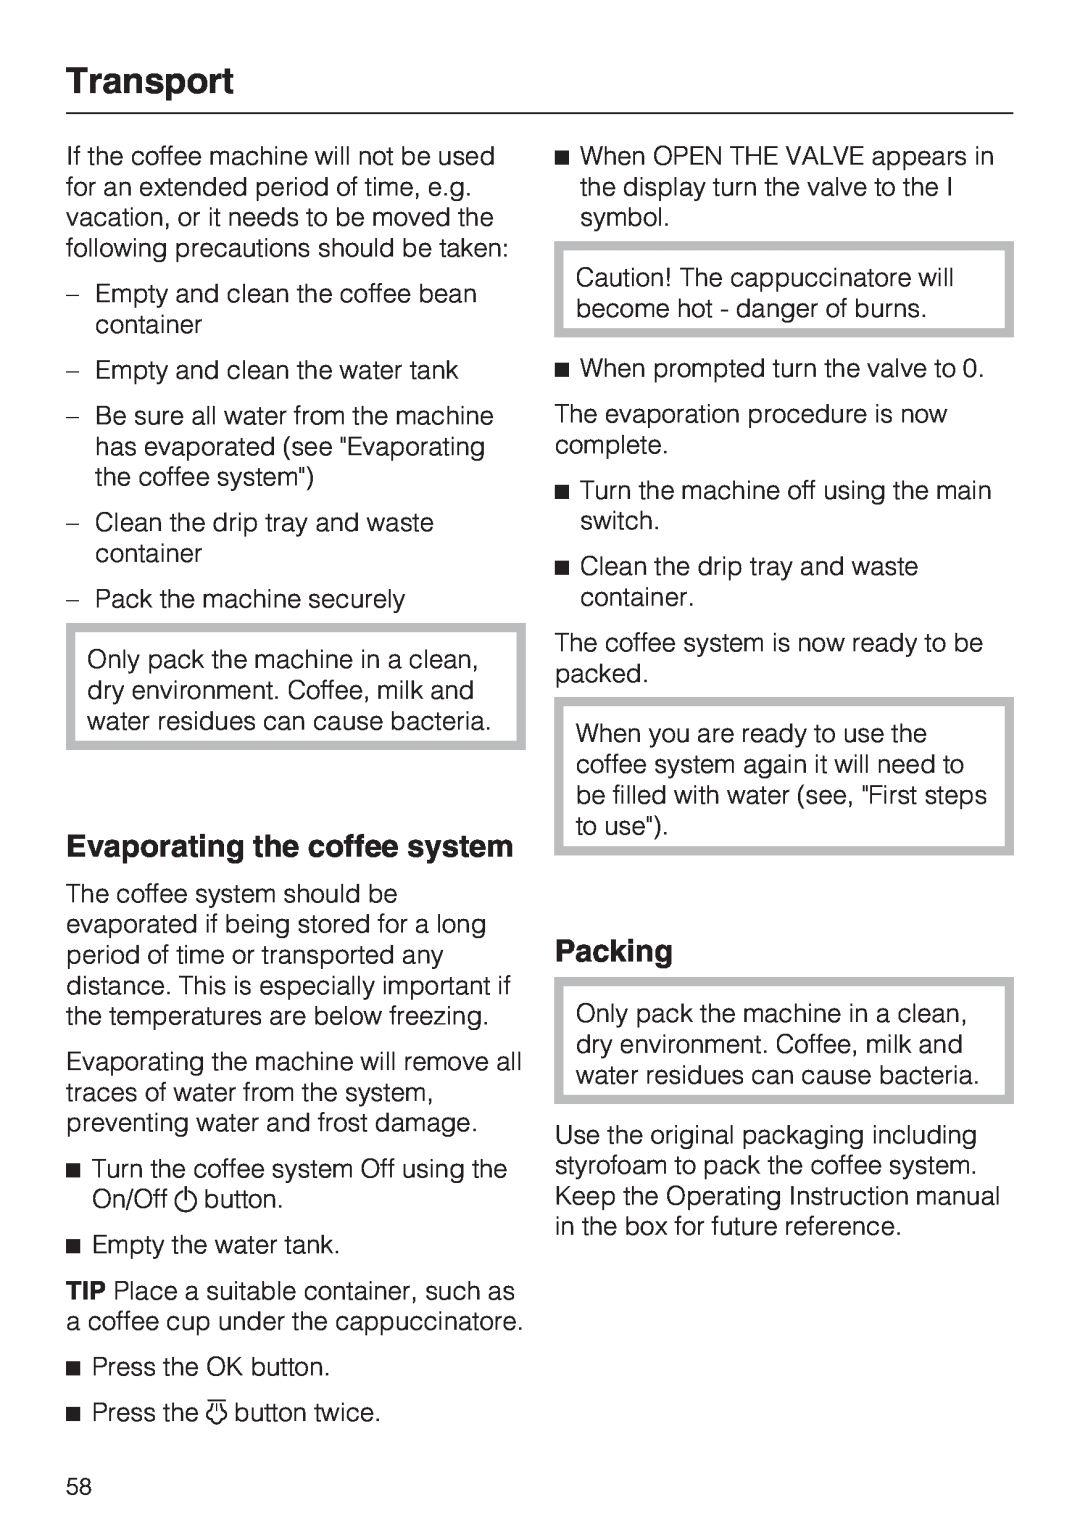 Miele CM 5000 operating instructions Transport, Evaporating the coffee system, Packing 